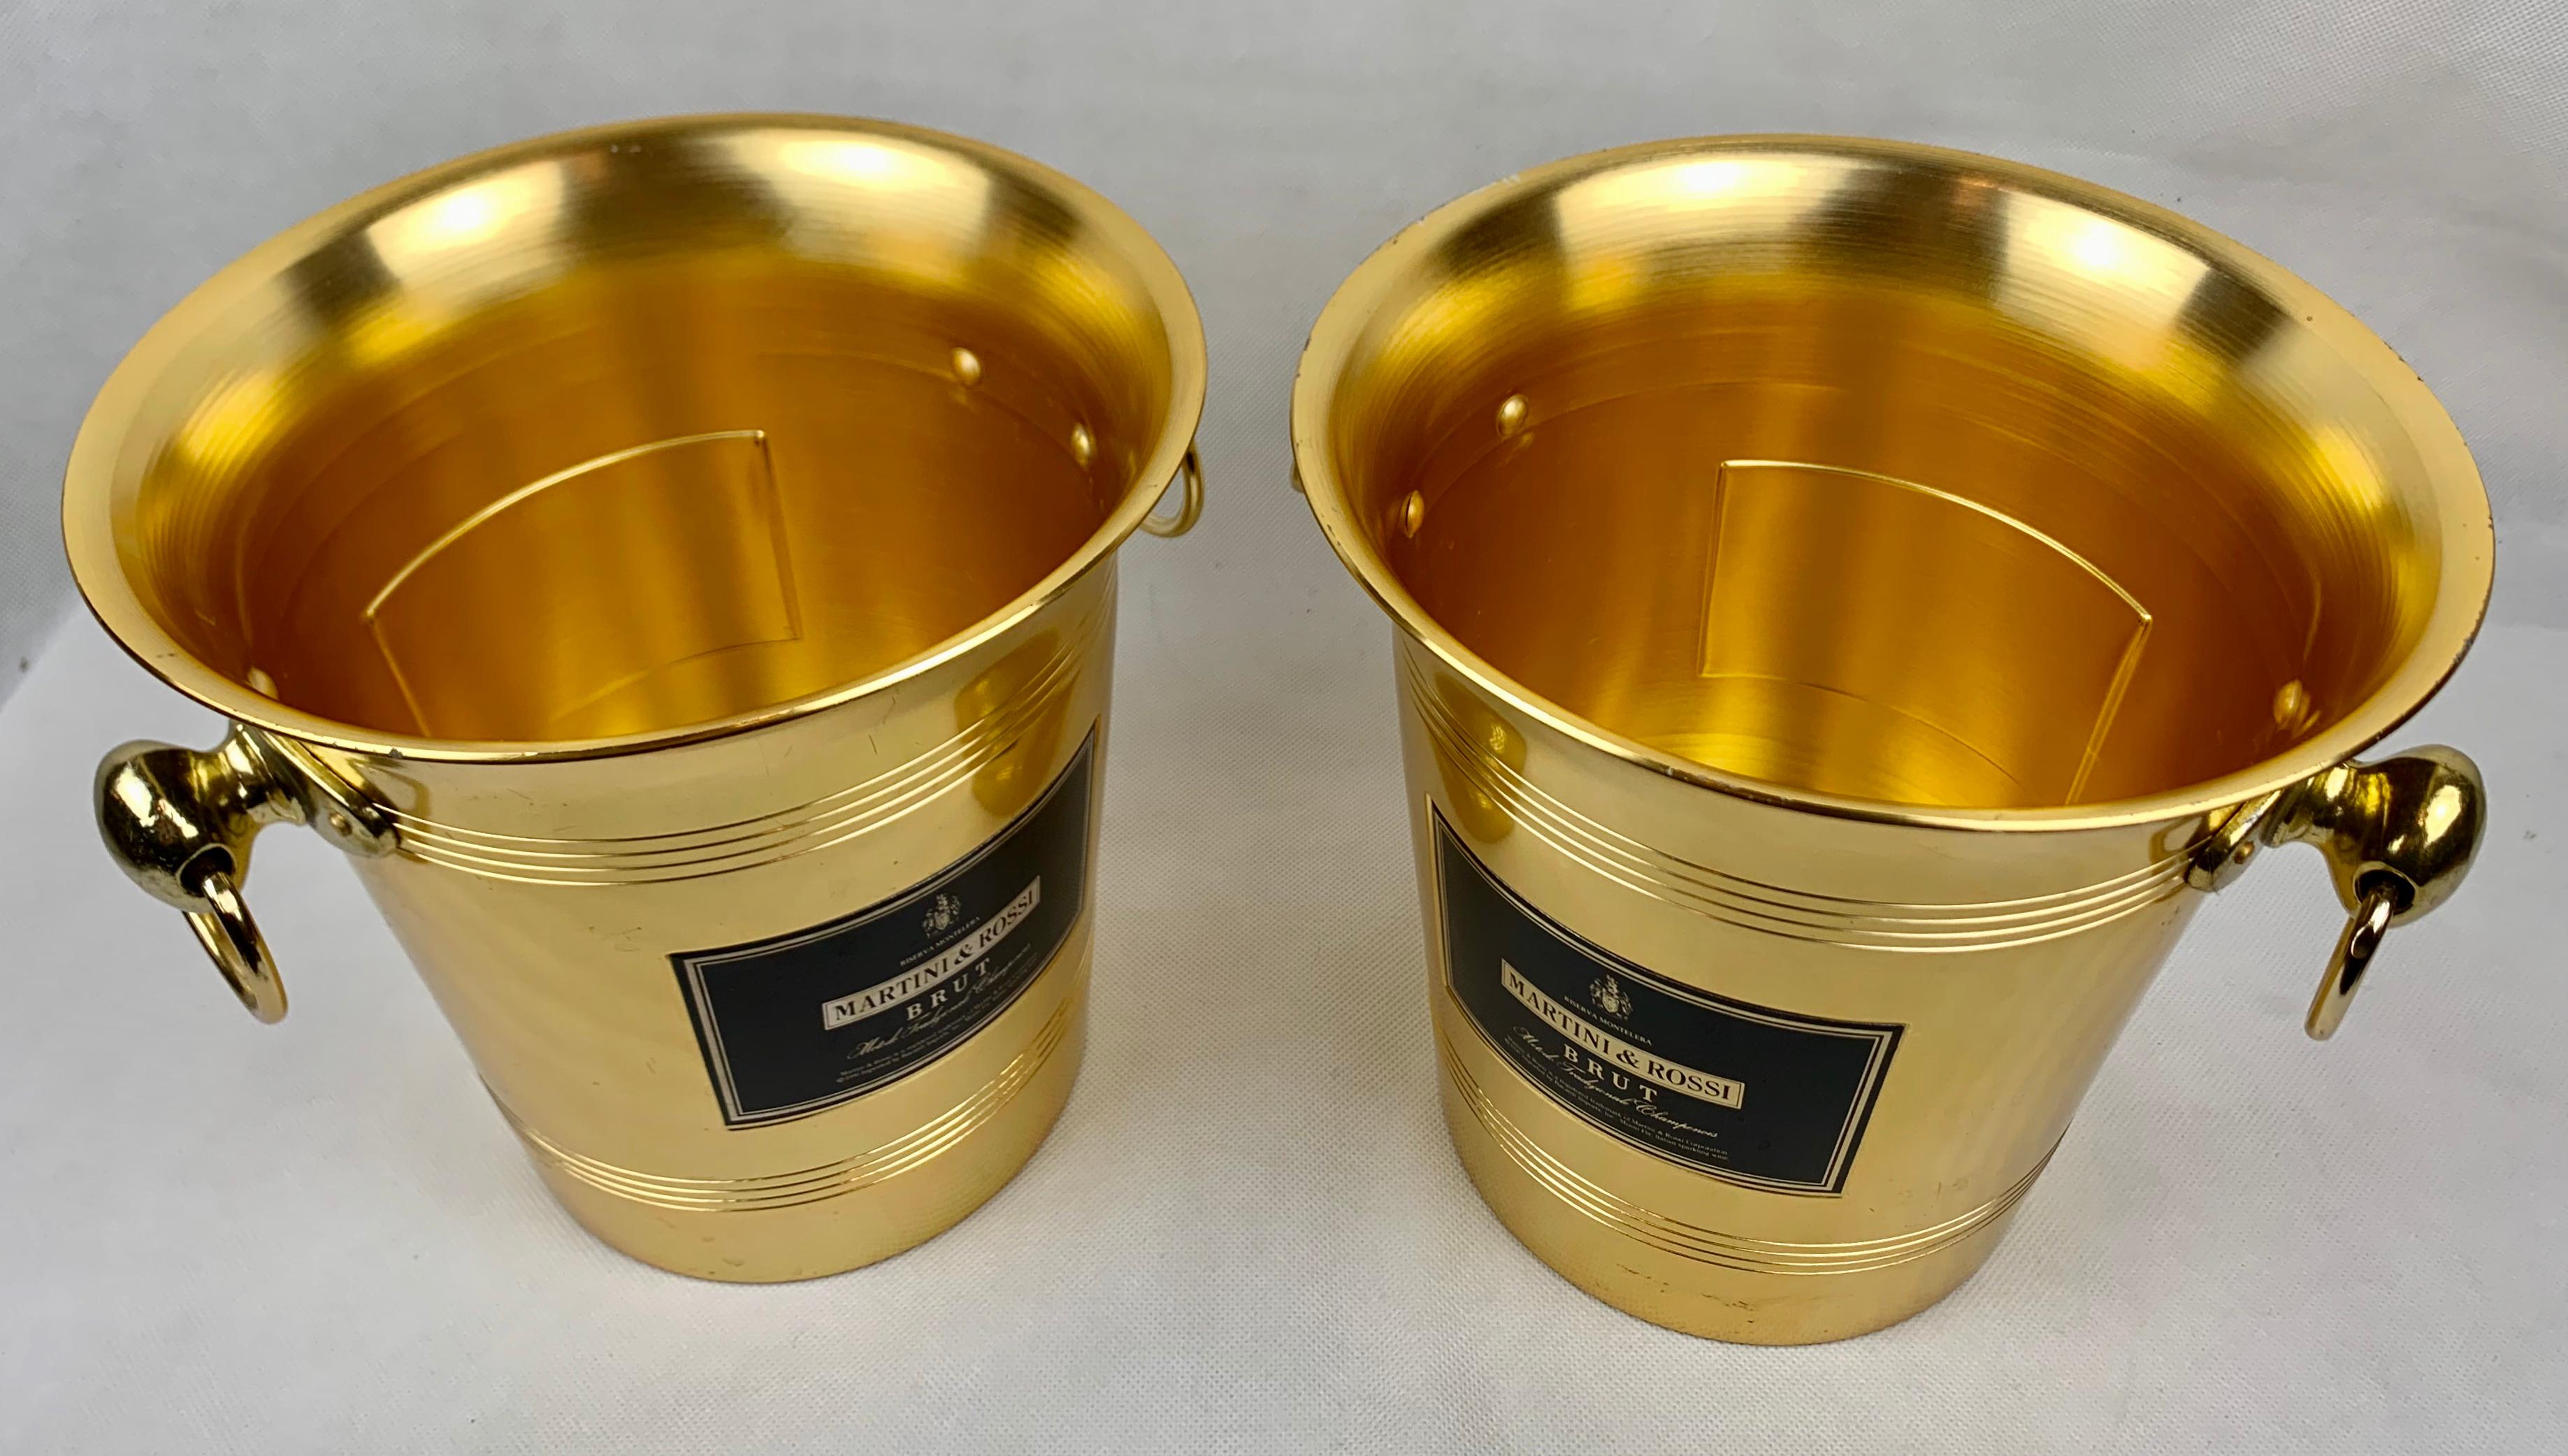 Late 20th Century A Pair of Martini & Rossi Golden Champagne Coolers by Vogalu, France, c, 1990